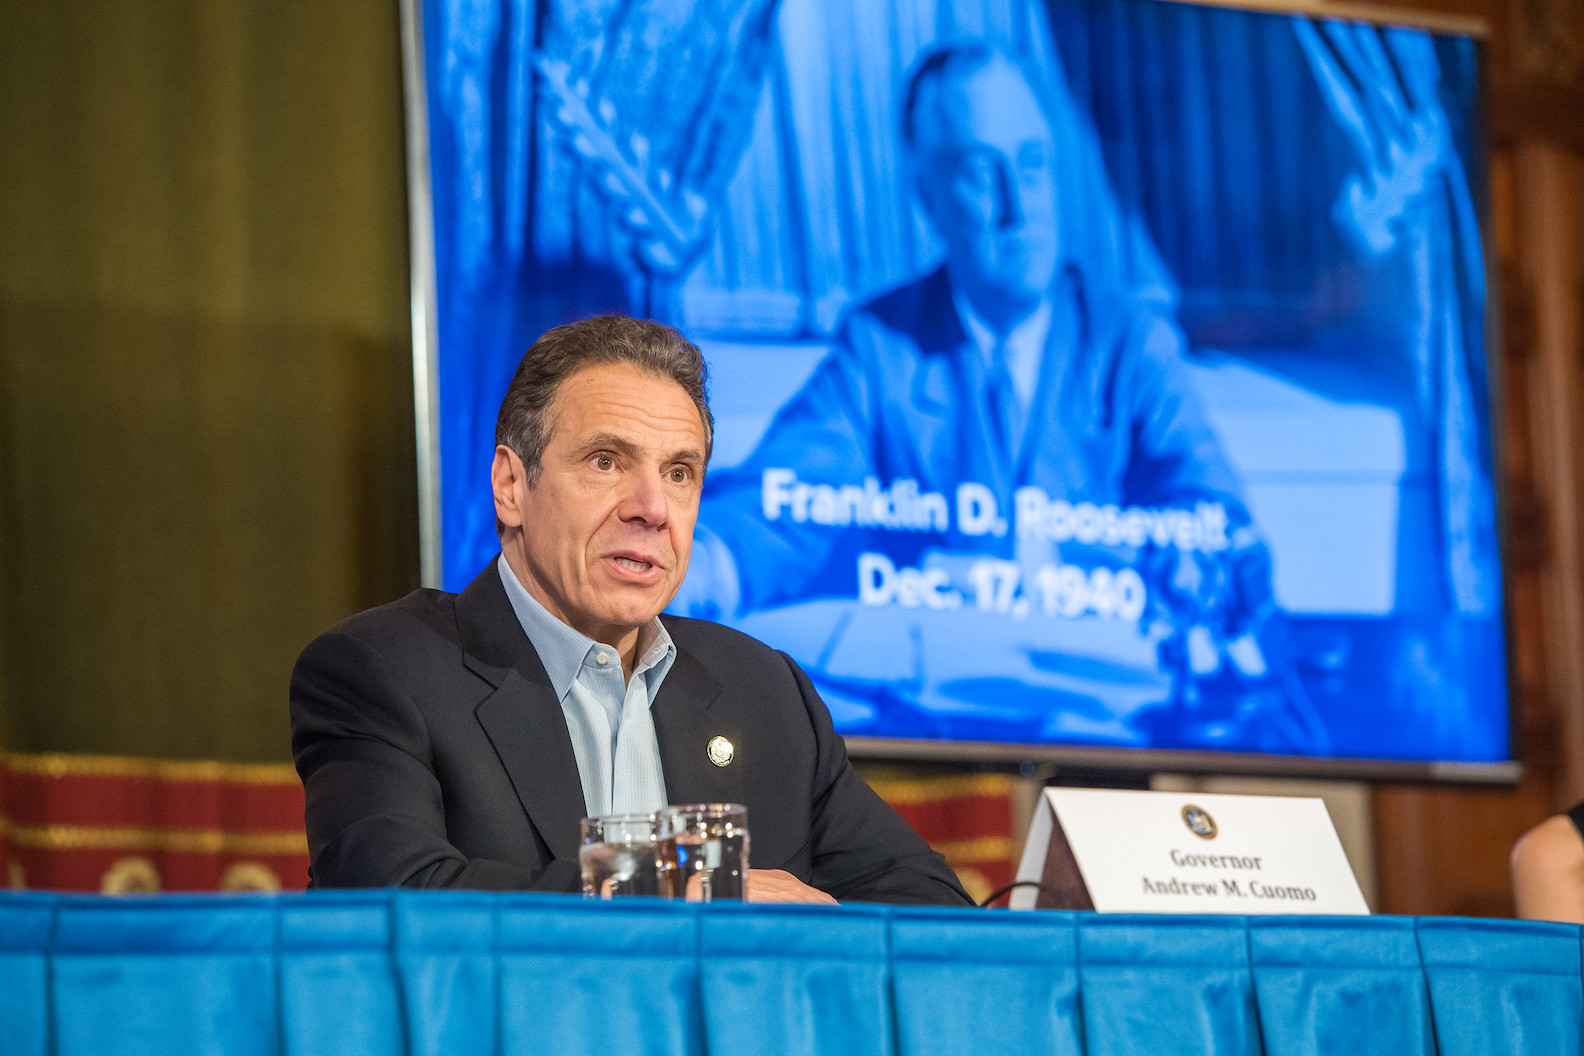 Gov. Andrew Cuomo delivered his daily COVID-19 coronavirus press briefing in the Red Room of the Capitol on Sunday. Cuomo announced the federal government is deploying approximately 1,000 personnel to New York. (Photo: Darren McGee/Office of Gov. Andrew M. Cuomo)
